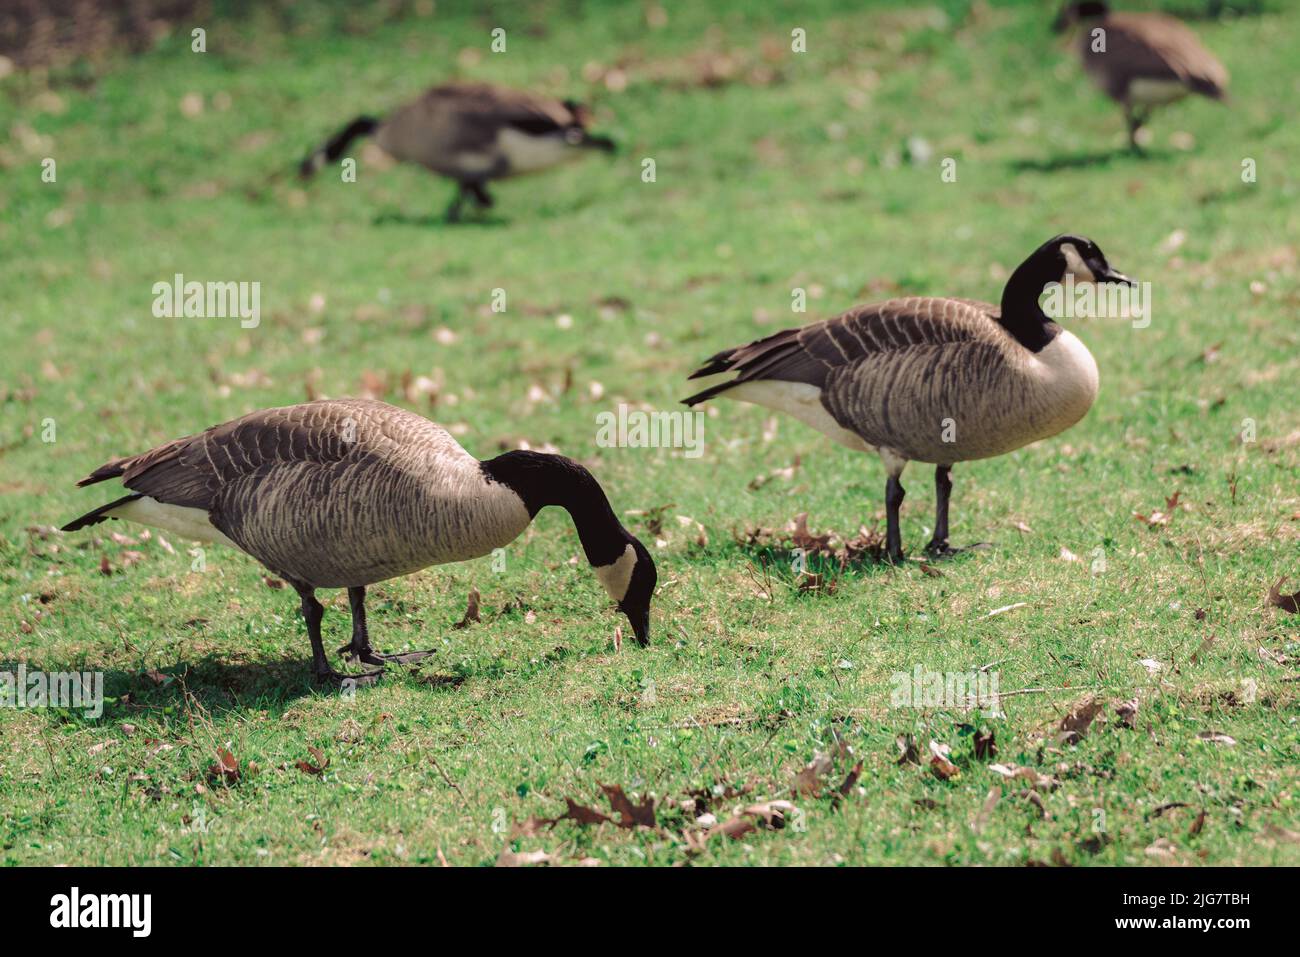 A closeup of a Canada geese (Branta canadensis) grazing in the grass Stock Photo